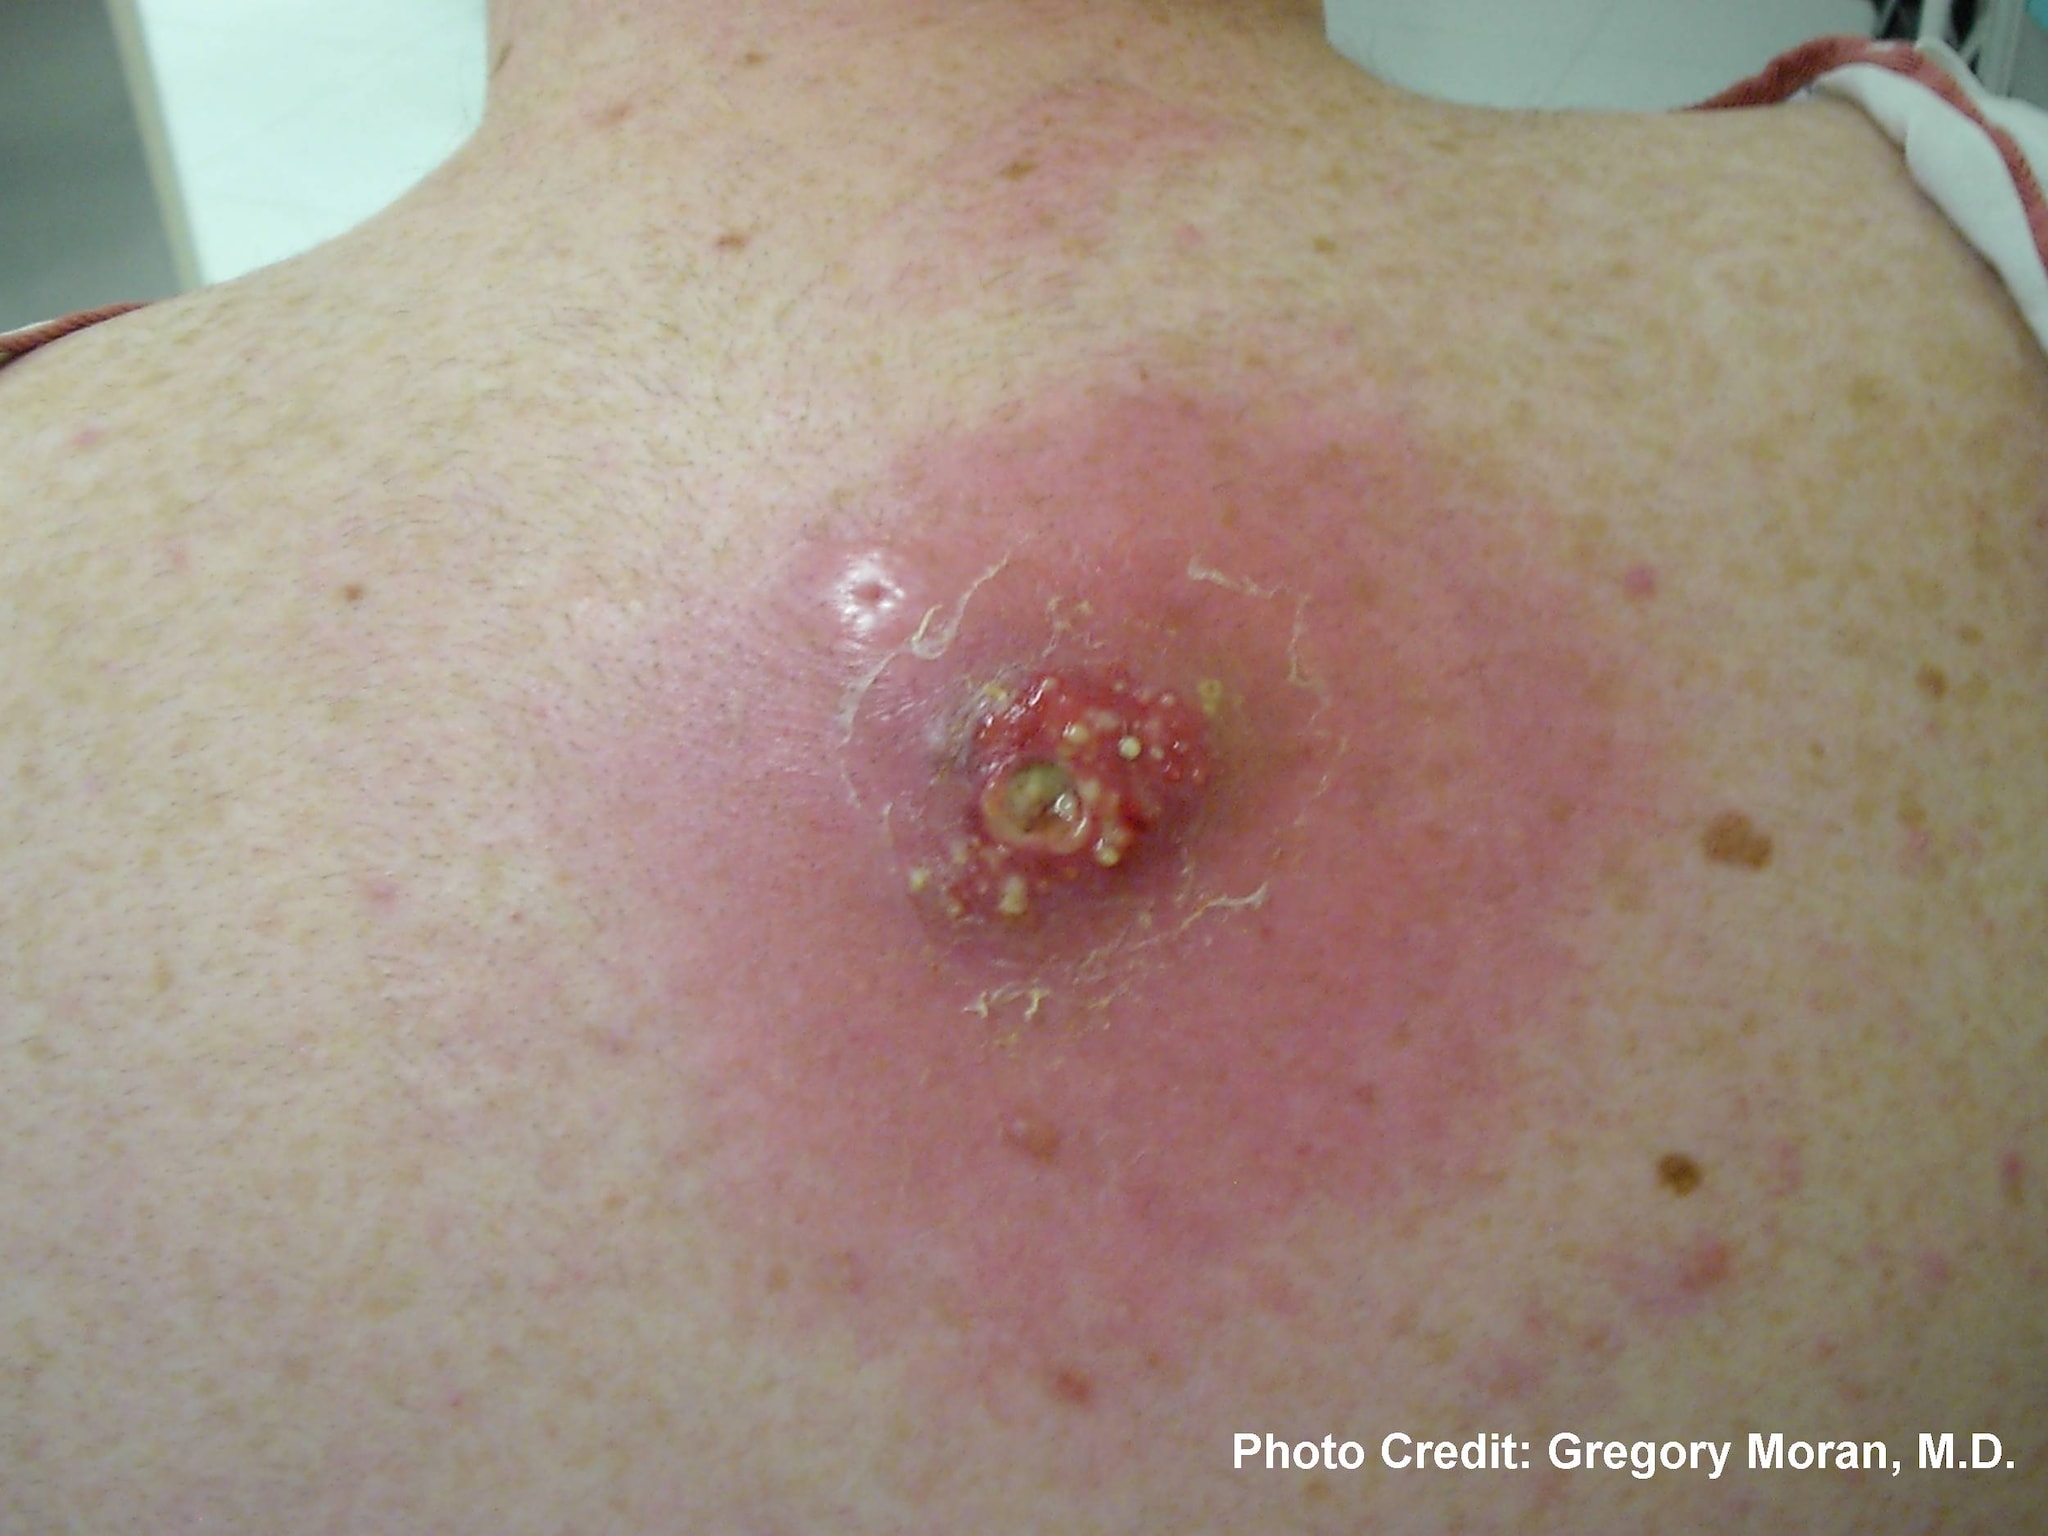 Photograph depicted a cutaneous abscess, caused by MRSA